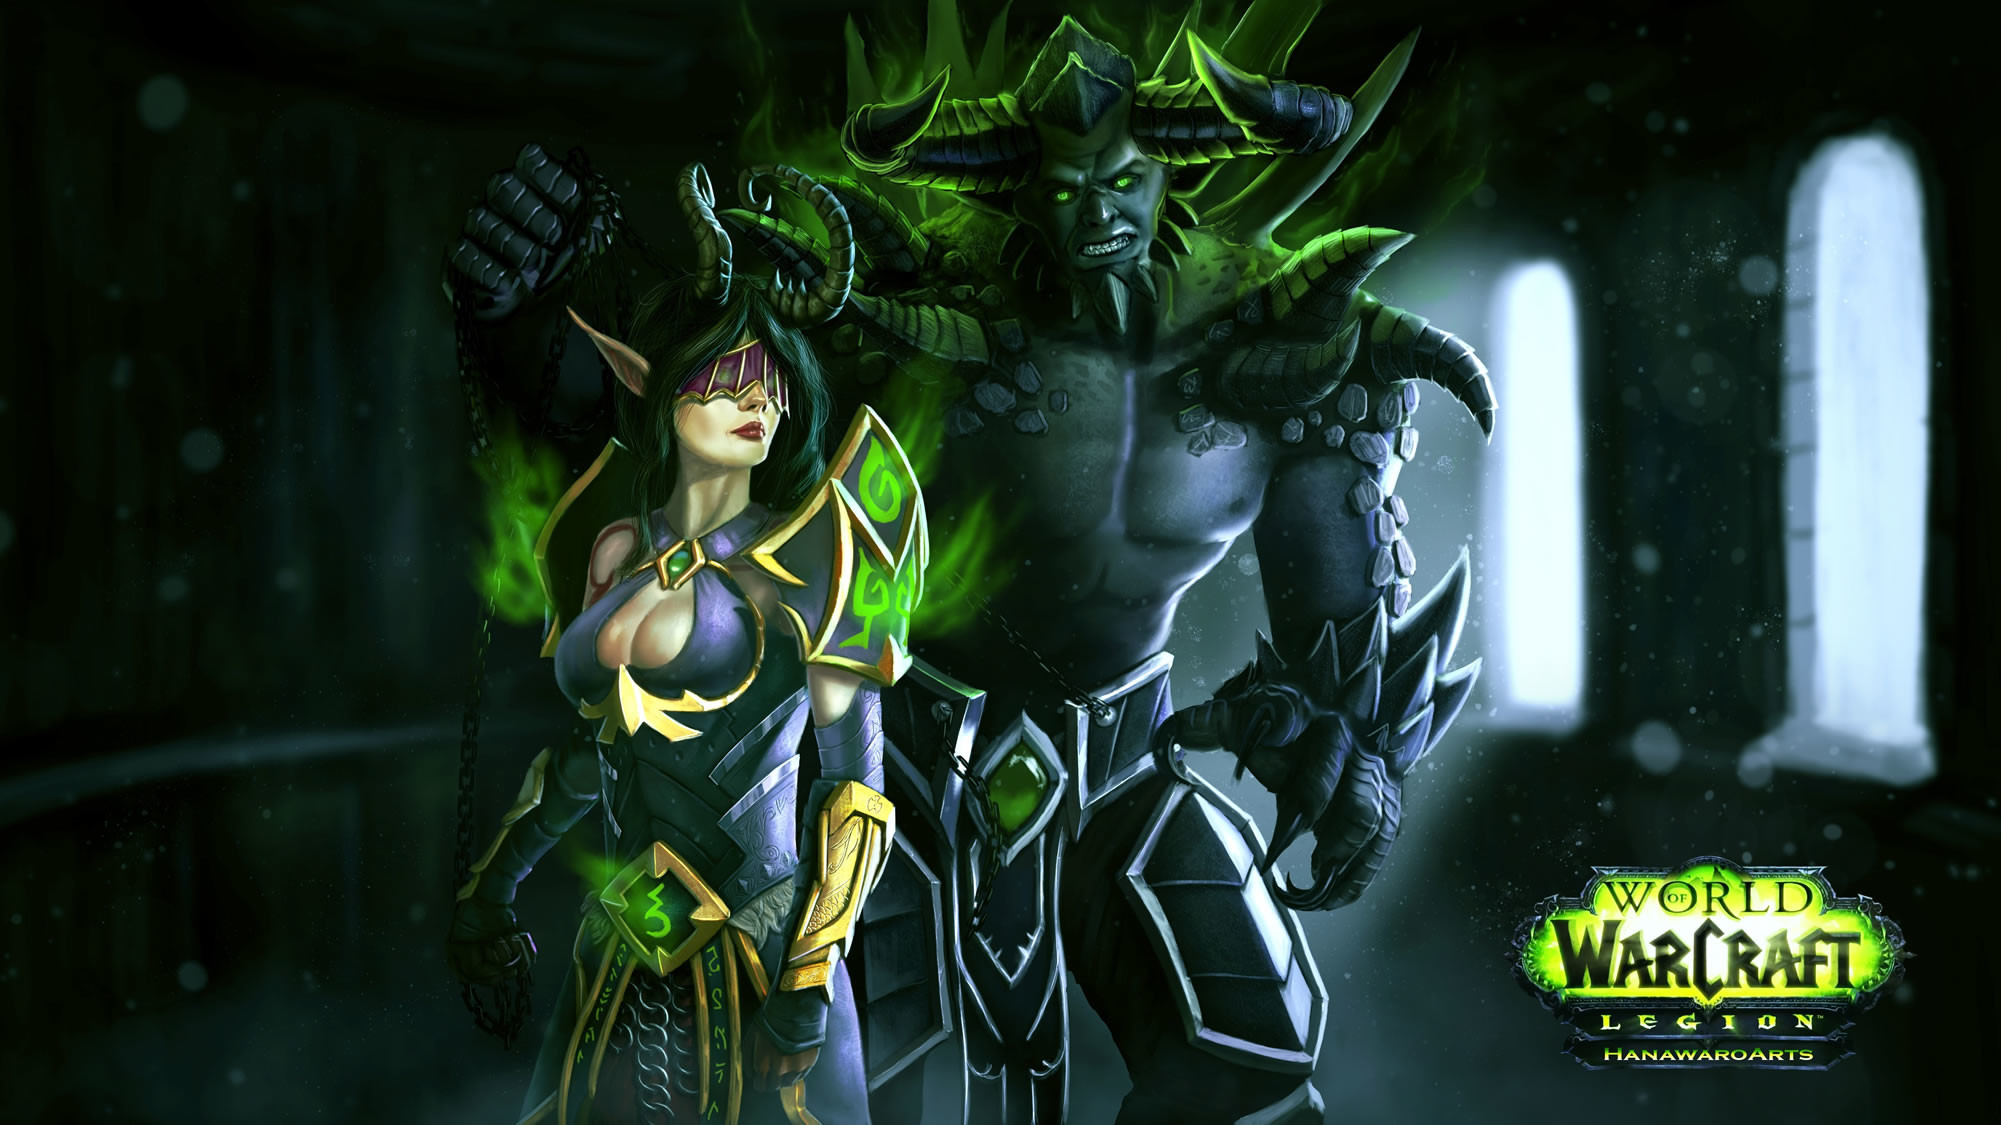 Full HD p World of warcraft Wallpapers HD, Desktop Backgrounds World of Warcraft Legion Wallpapers Wallpapers